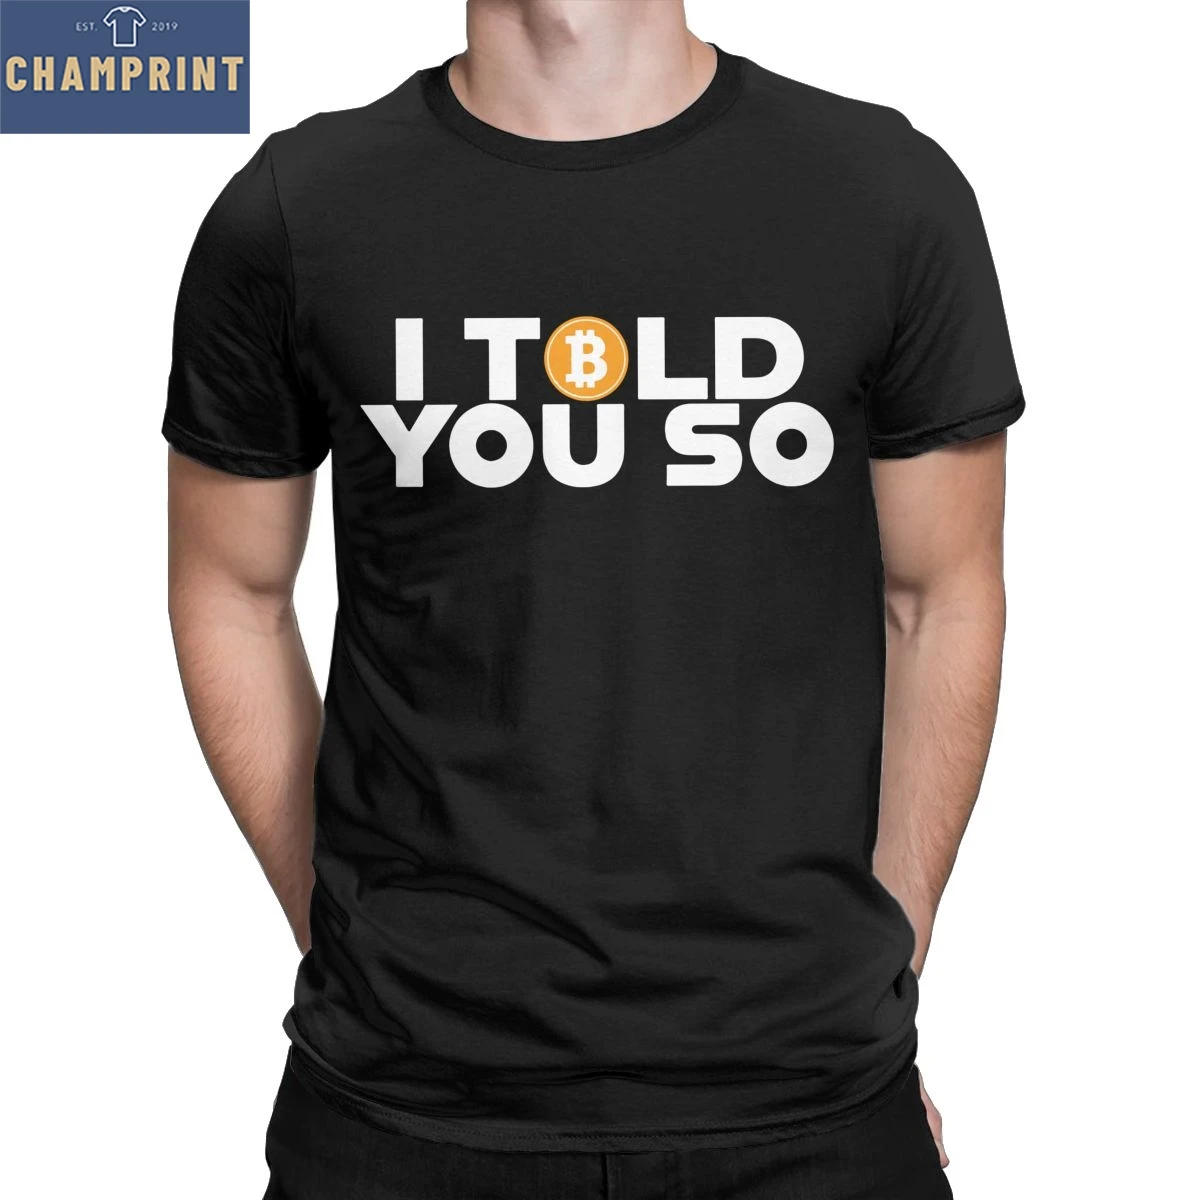 

Men's Bitcoin I Told You So T Shirt BTC Crypto Currency Cryptocurrency 100% Cotton Clothes Round Neck Tee Shirt Summer T-Shirts